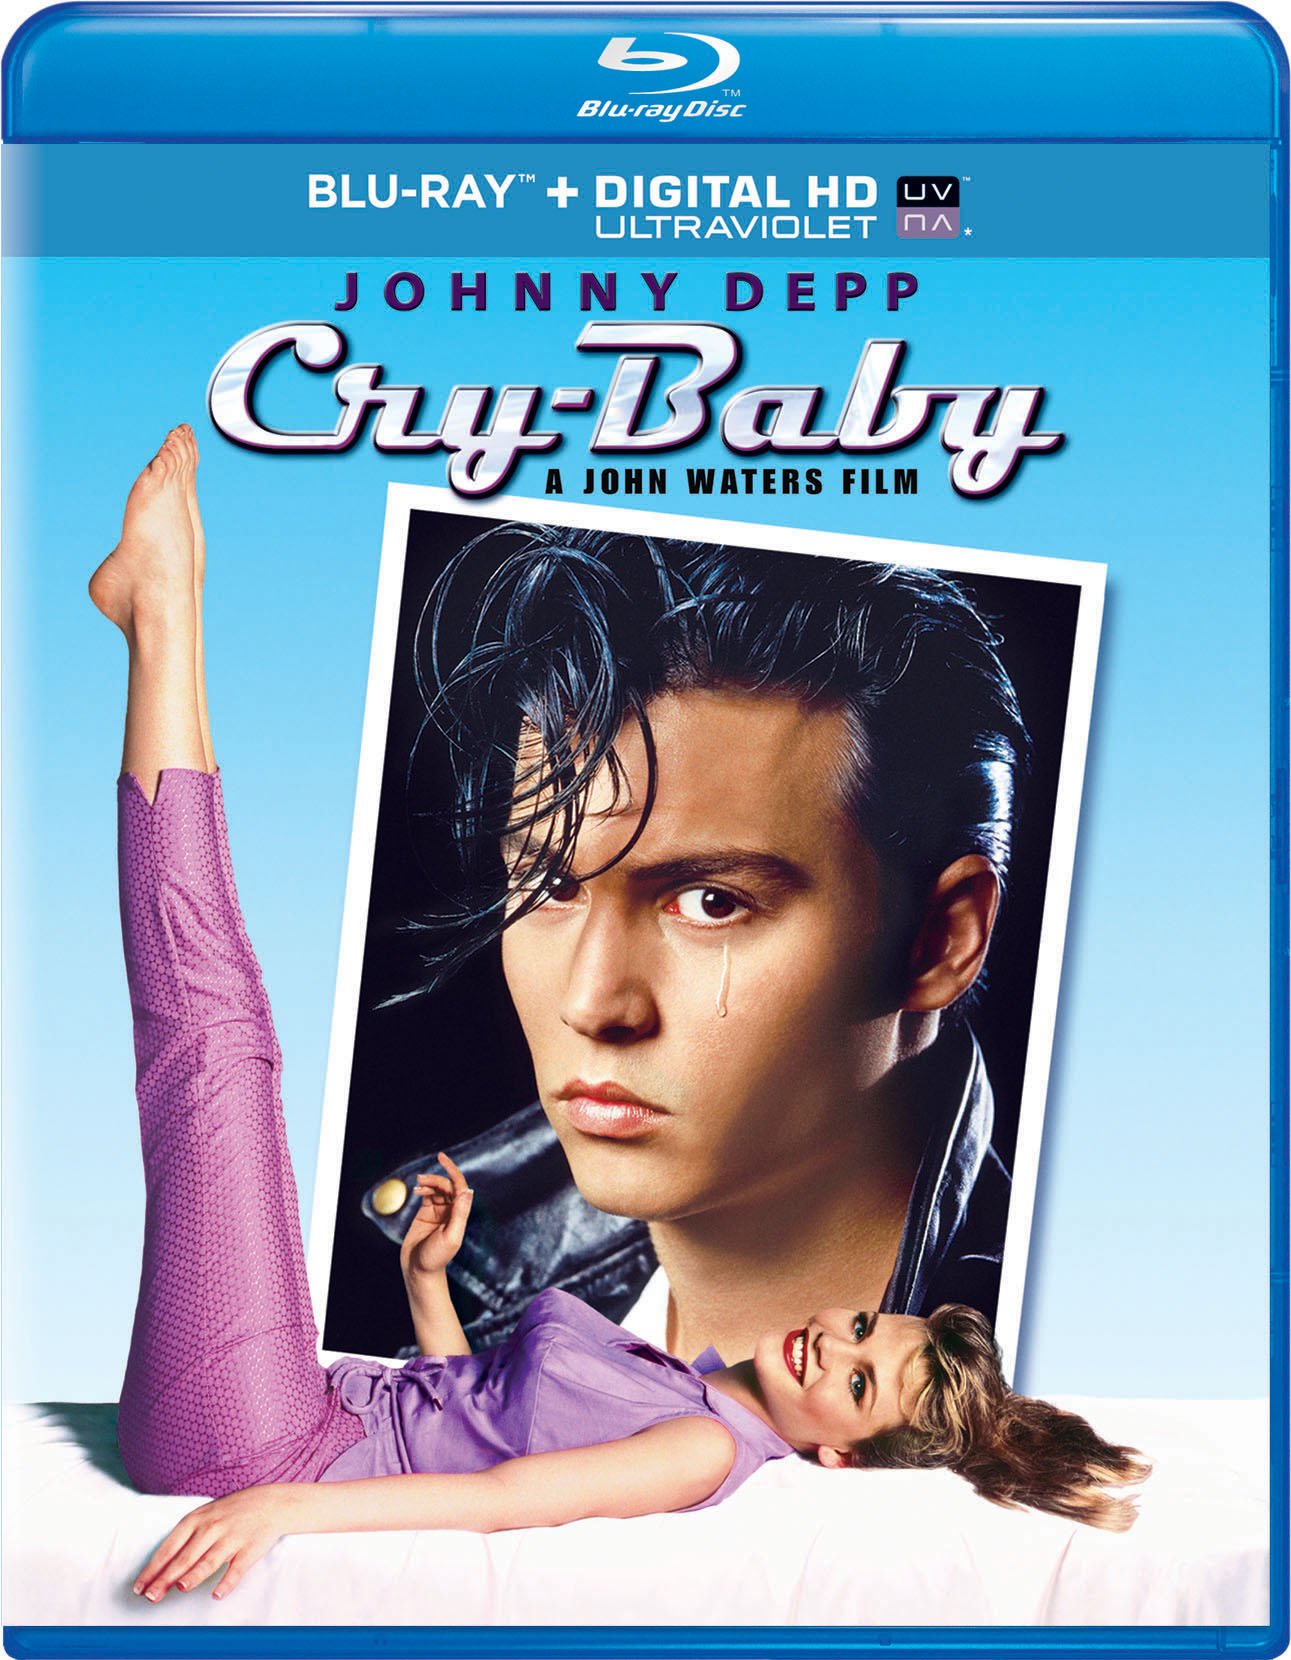 Cry-Baby DVD Release Date1291 x 1660